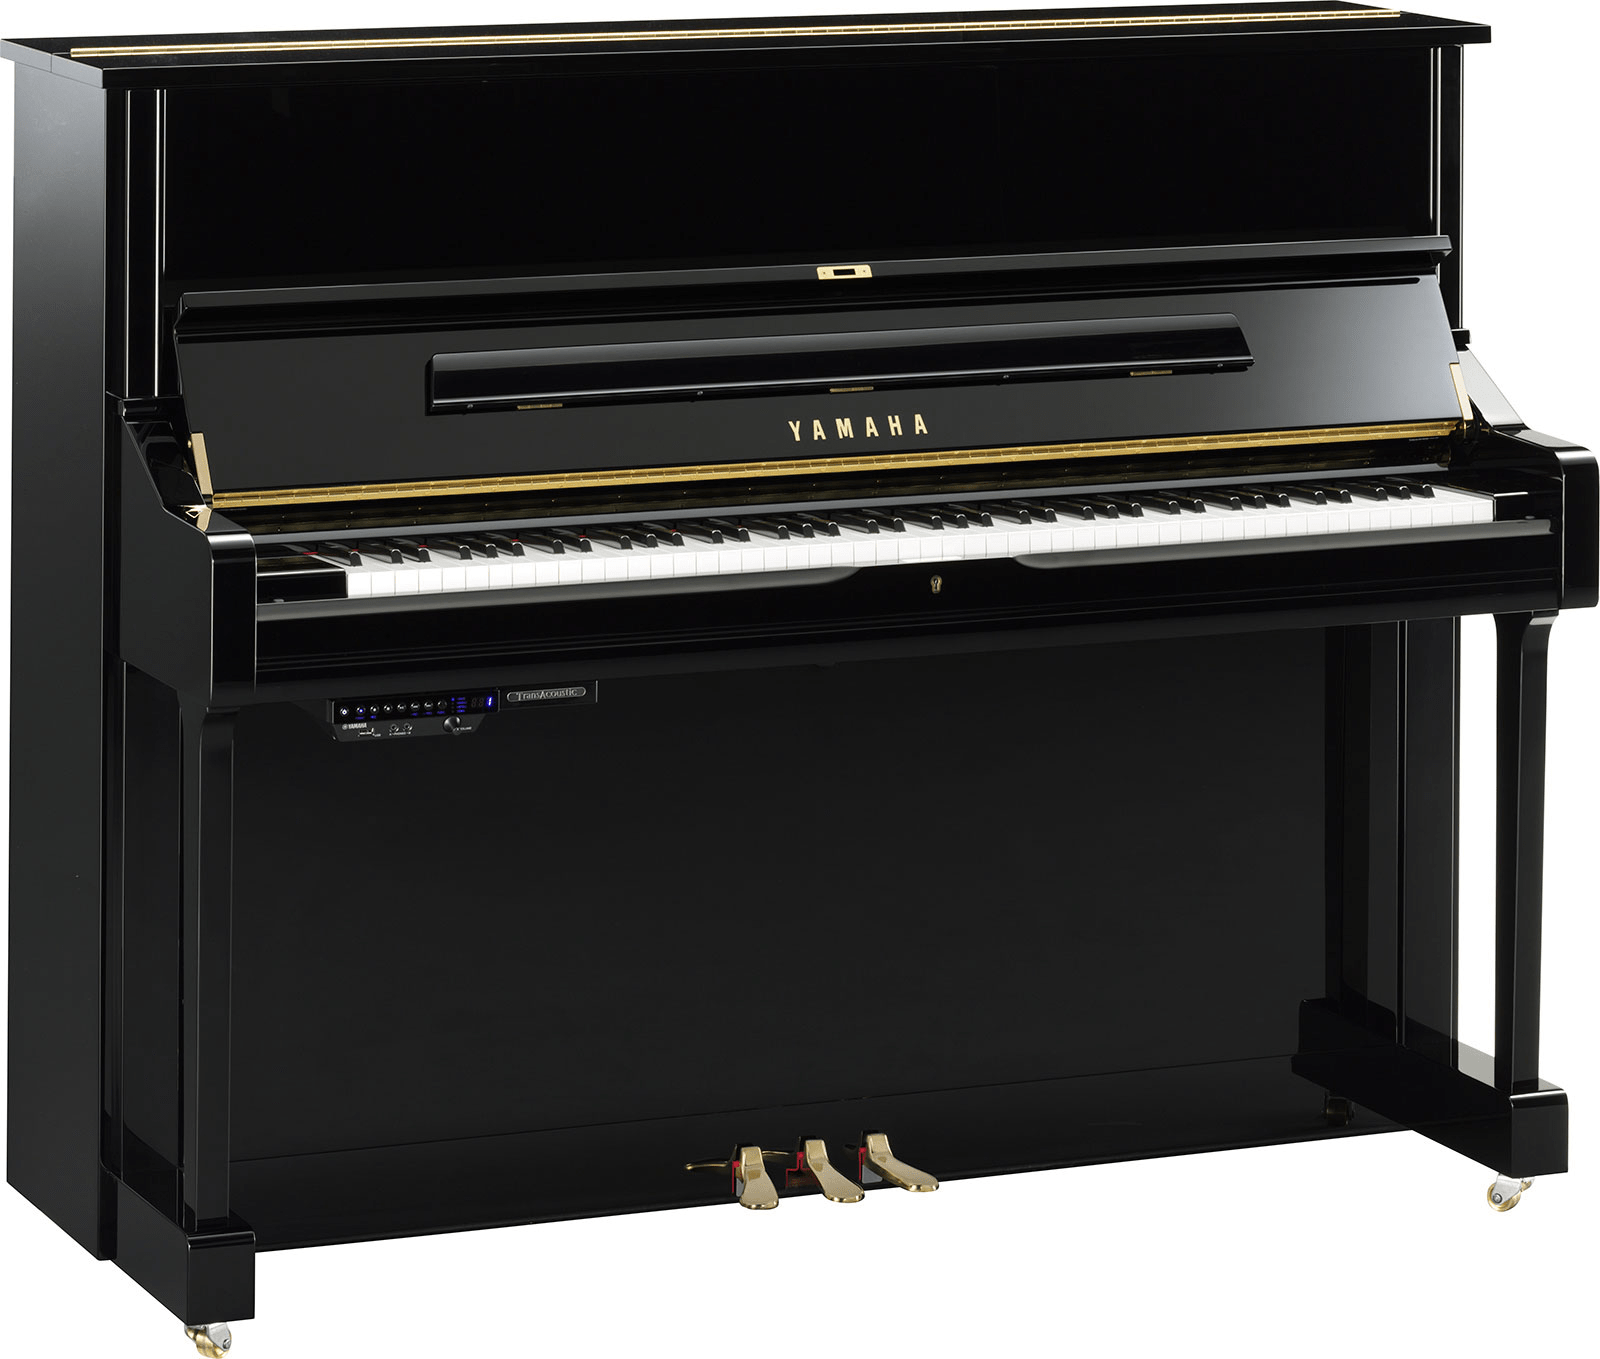 Looking for an acoustic piano? Here's Yamaha’s TransAcoustic piano - the one you've been looking for.